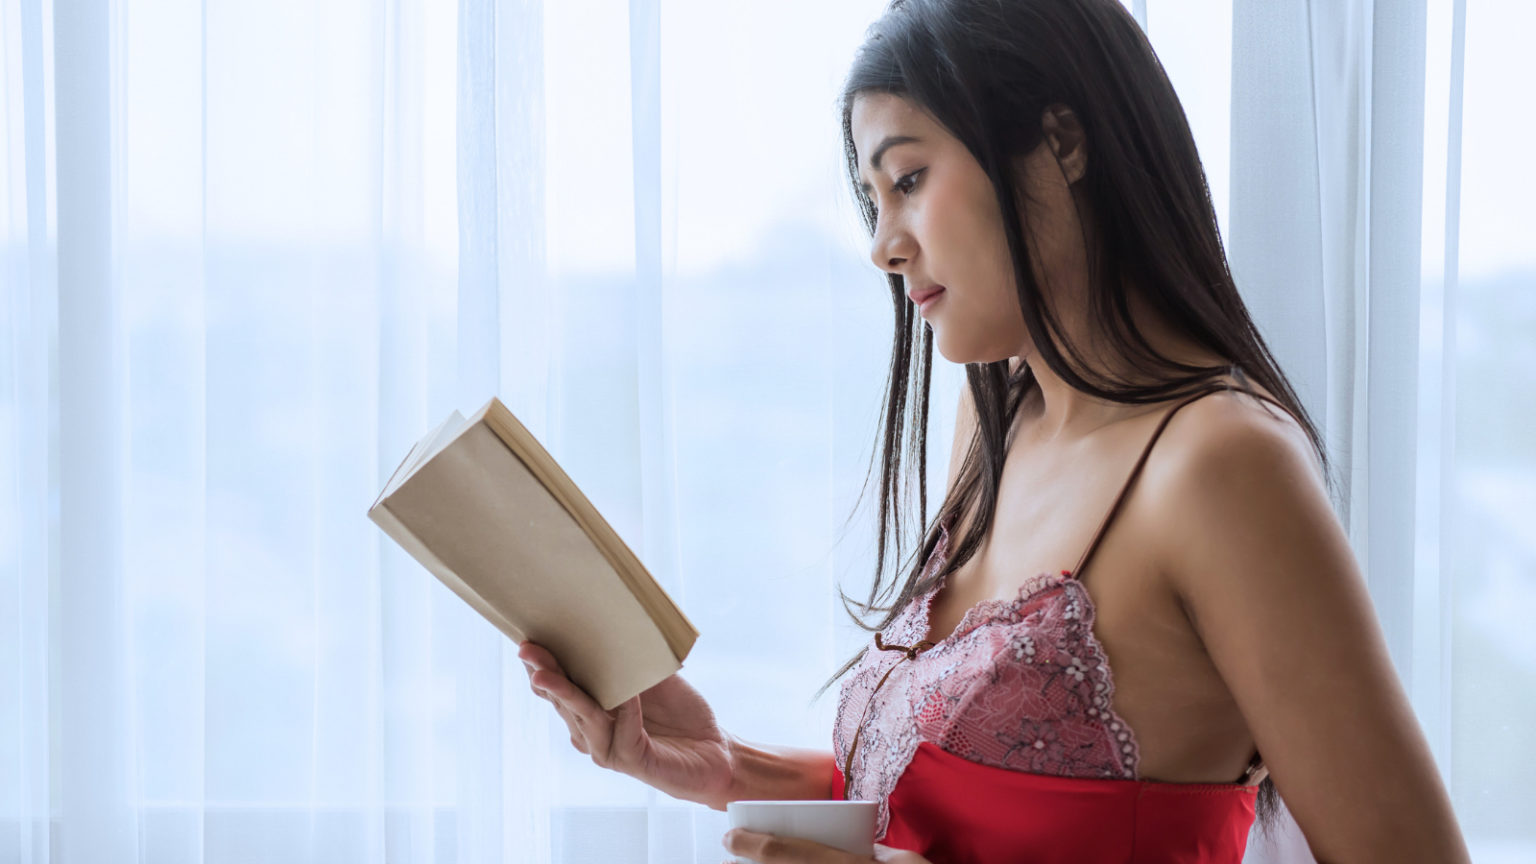 Photo of a feminine person in red lingerie reading a book in front of a window